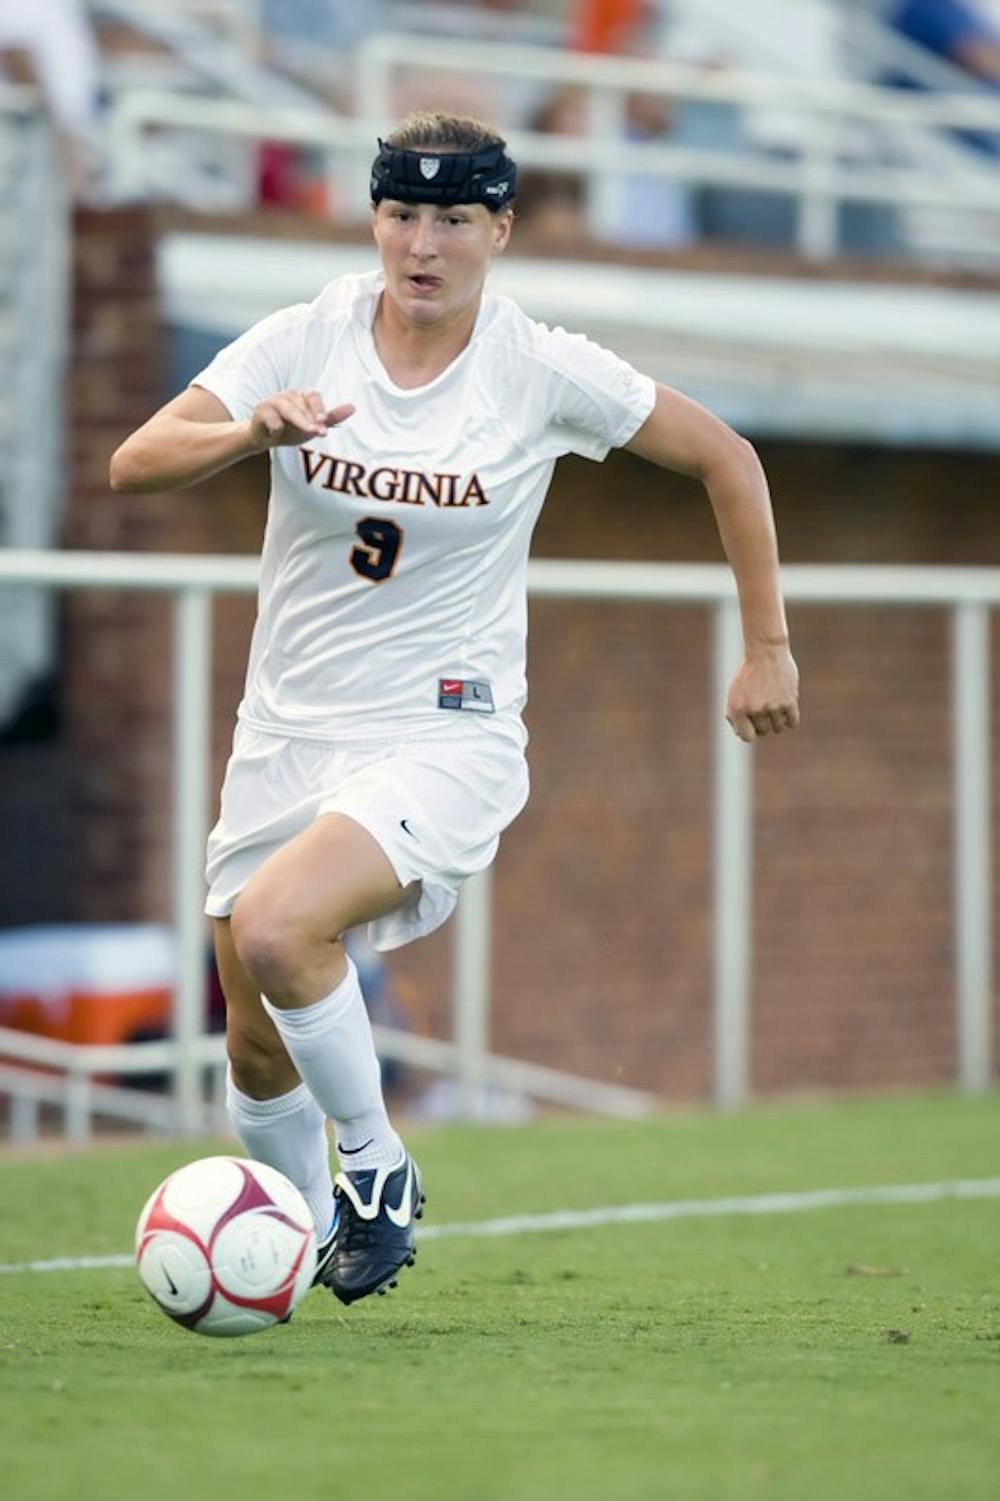 Virginia Cavaliers forward Lauren Alwine (9) in action against Loyola.  The #6 Virginia Cavaliers defeated the Loyola College Greyhounds 4-0 in a NCAA Women's Soccer game held at Klockner Stadium on the Grounds of the University of Virginia in Charlottesville, VA on August 22, 2008.